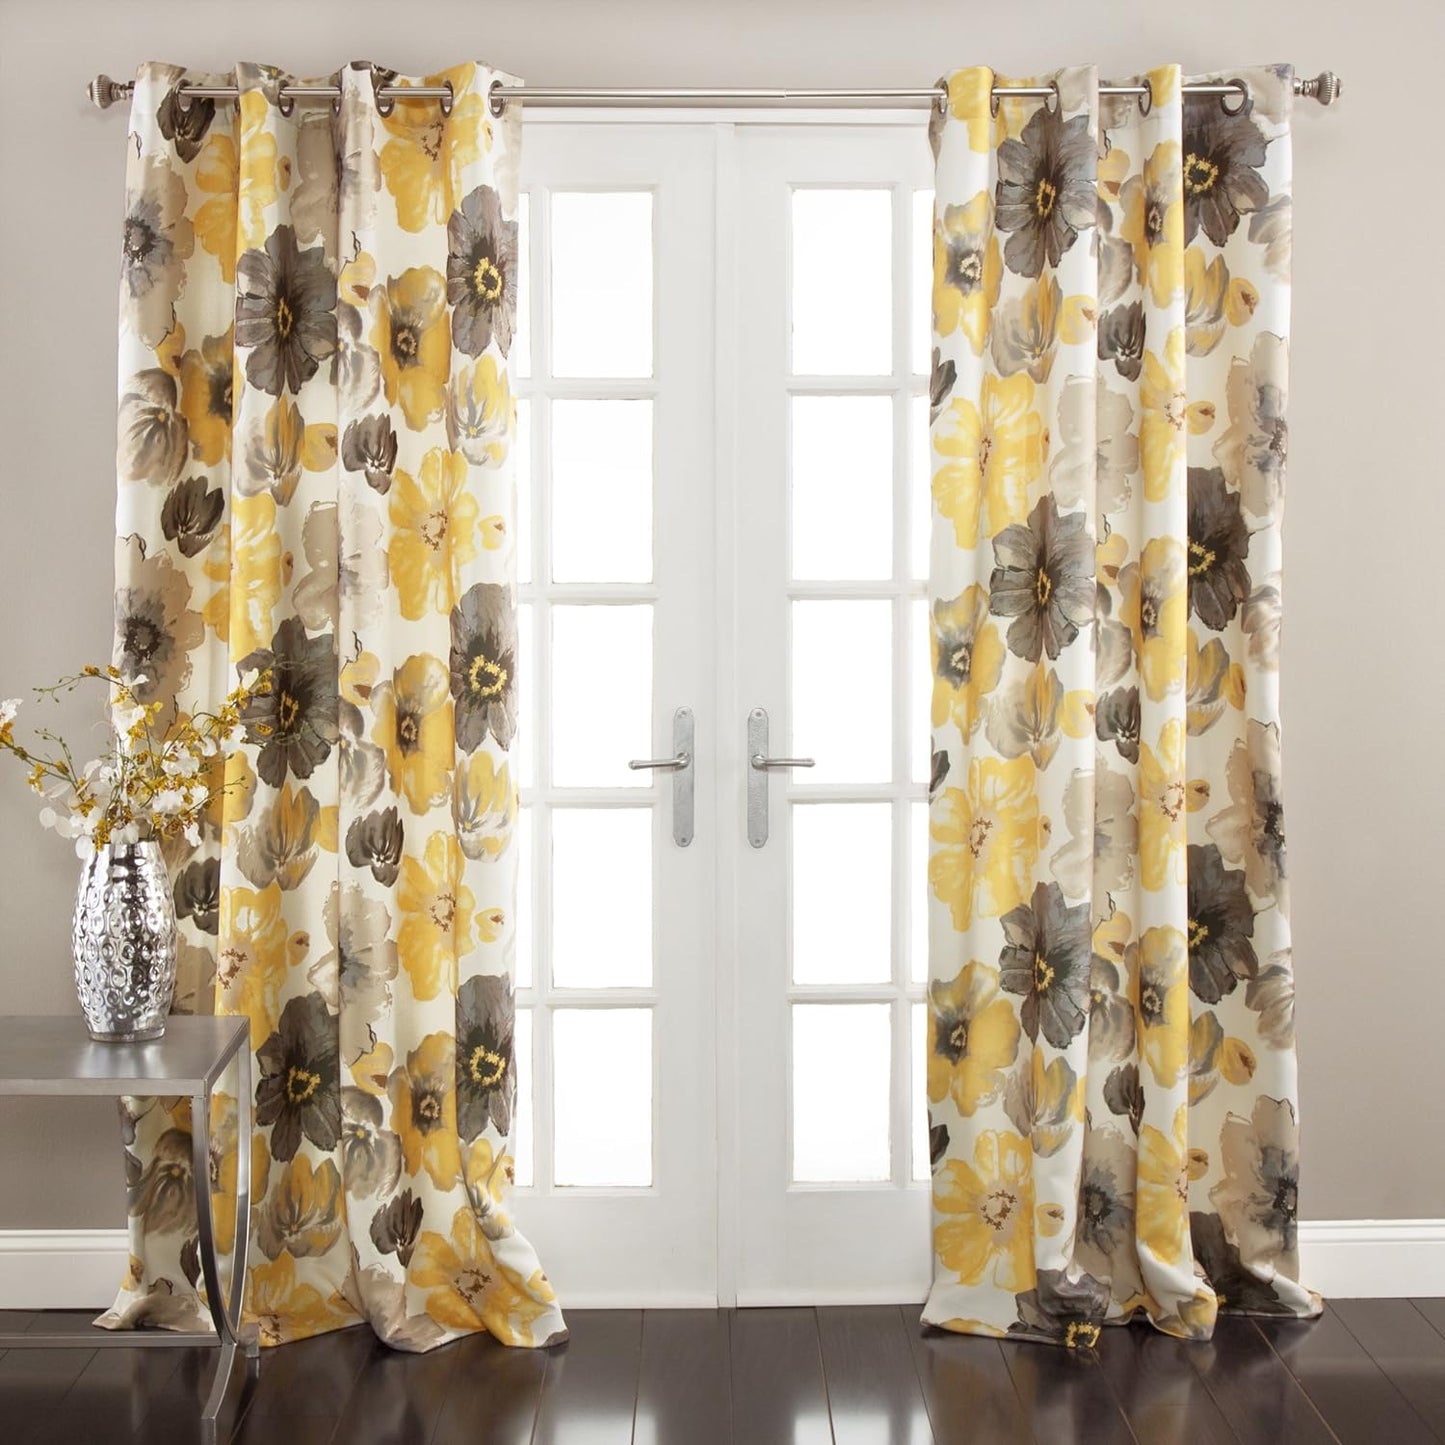 Leah Light Filtering Window Curtain Panel Pair Floral Insulated Grommet, 52"W X 95"L, Yellow and Gray